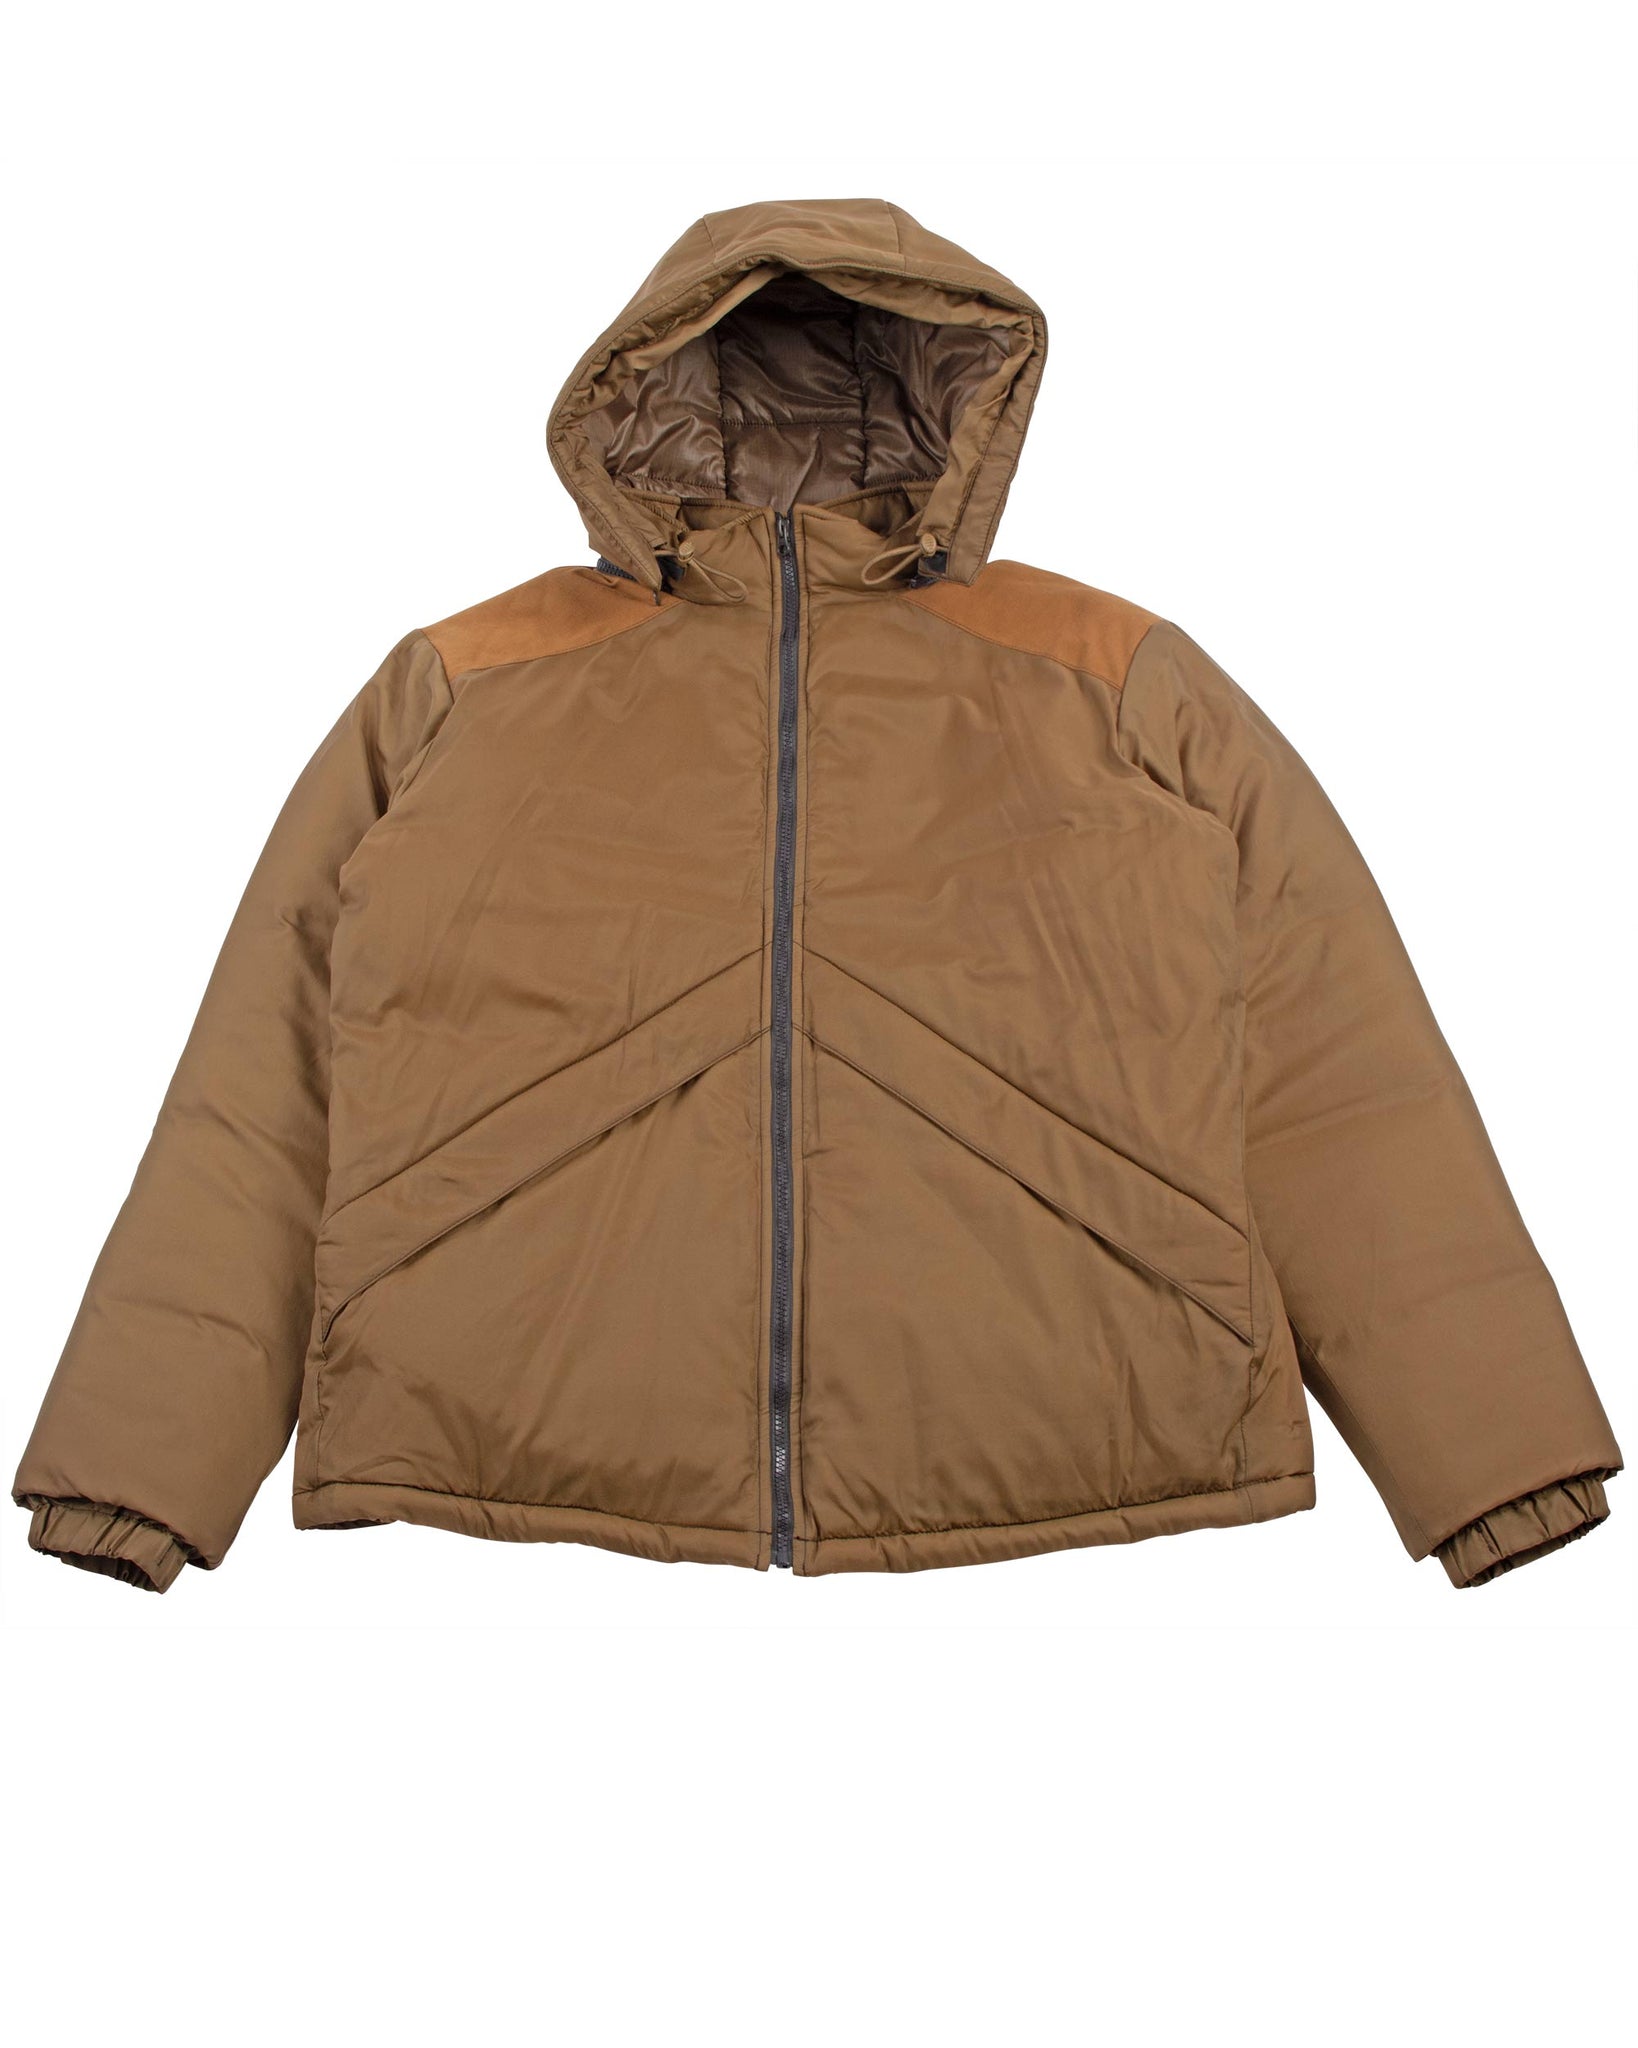 The Real McCoy's MJ21130 Parka, Extreme Cold Weather (Gen I) Coyote